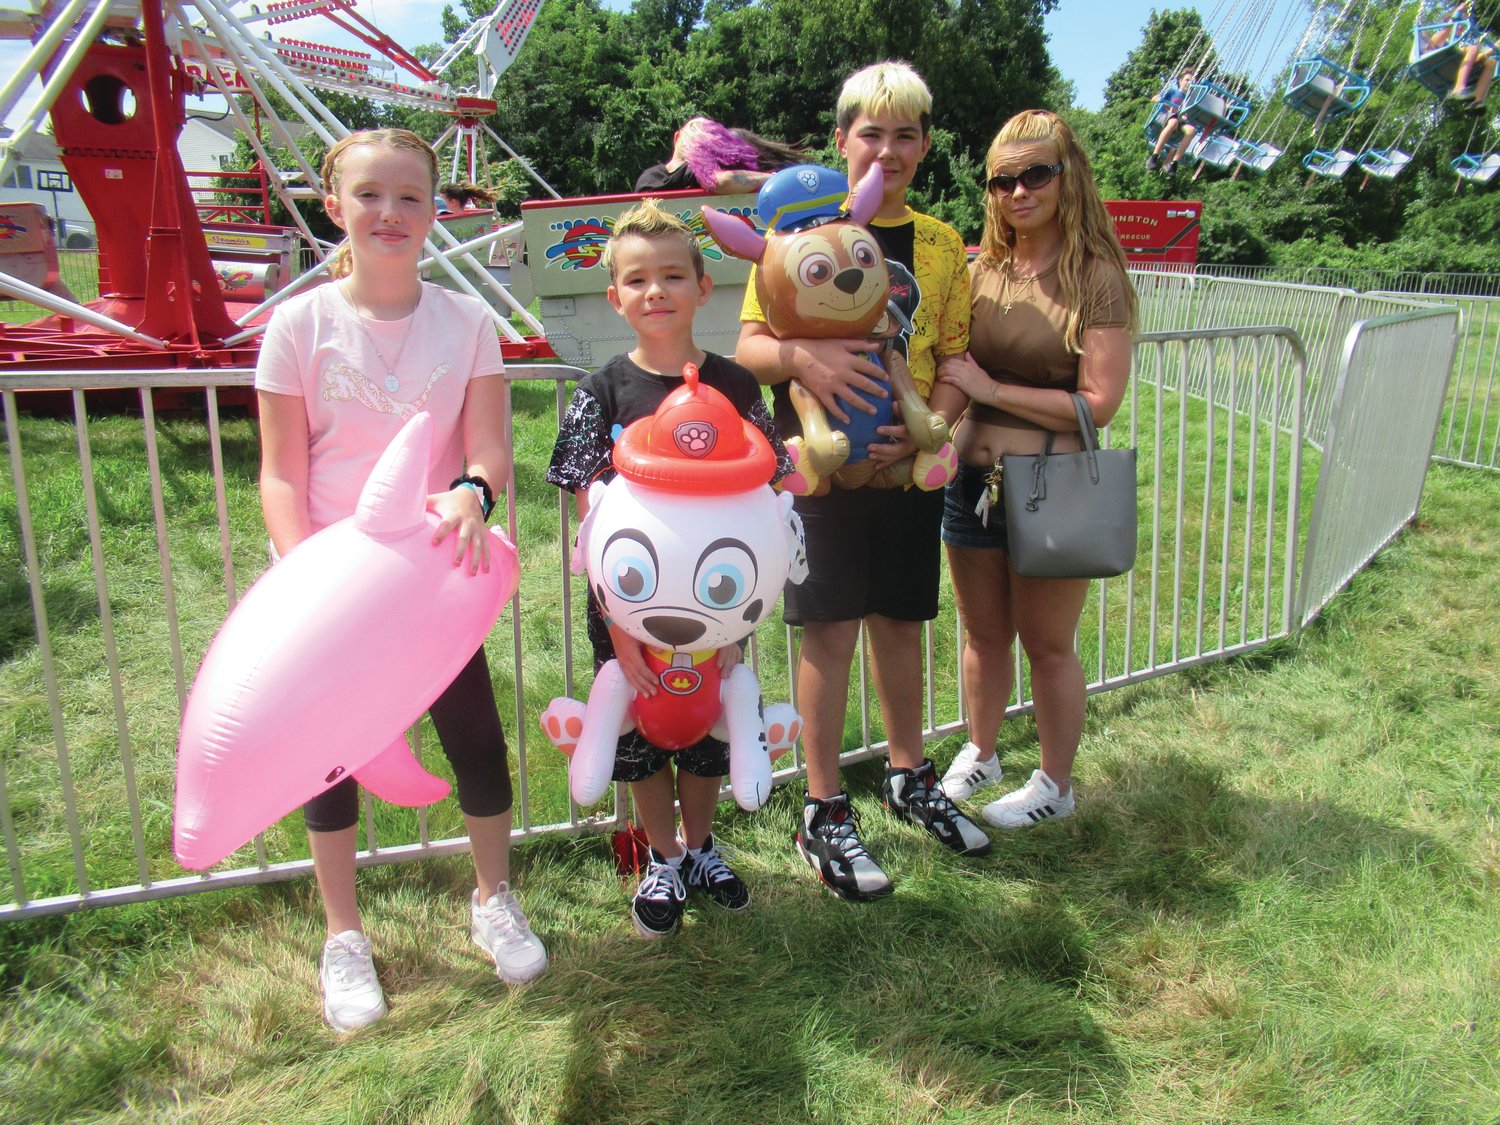 POPULAR PRIZES: Isabella Corentos, Lorenzo Corentos and Nicholas Nardolillo are joined by their mom while showing off the inflated prizes they won at the hammer game.